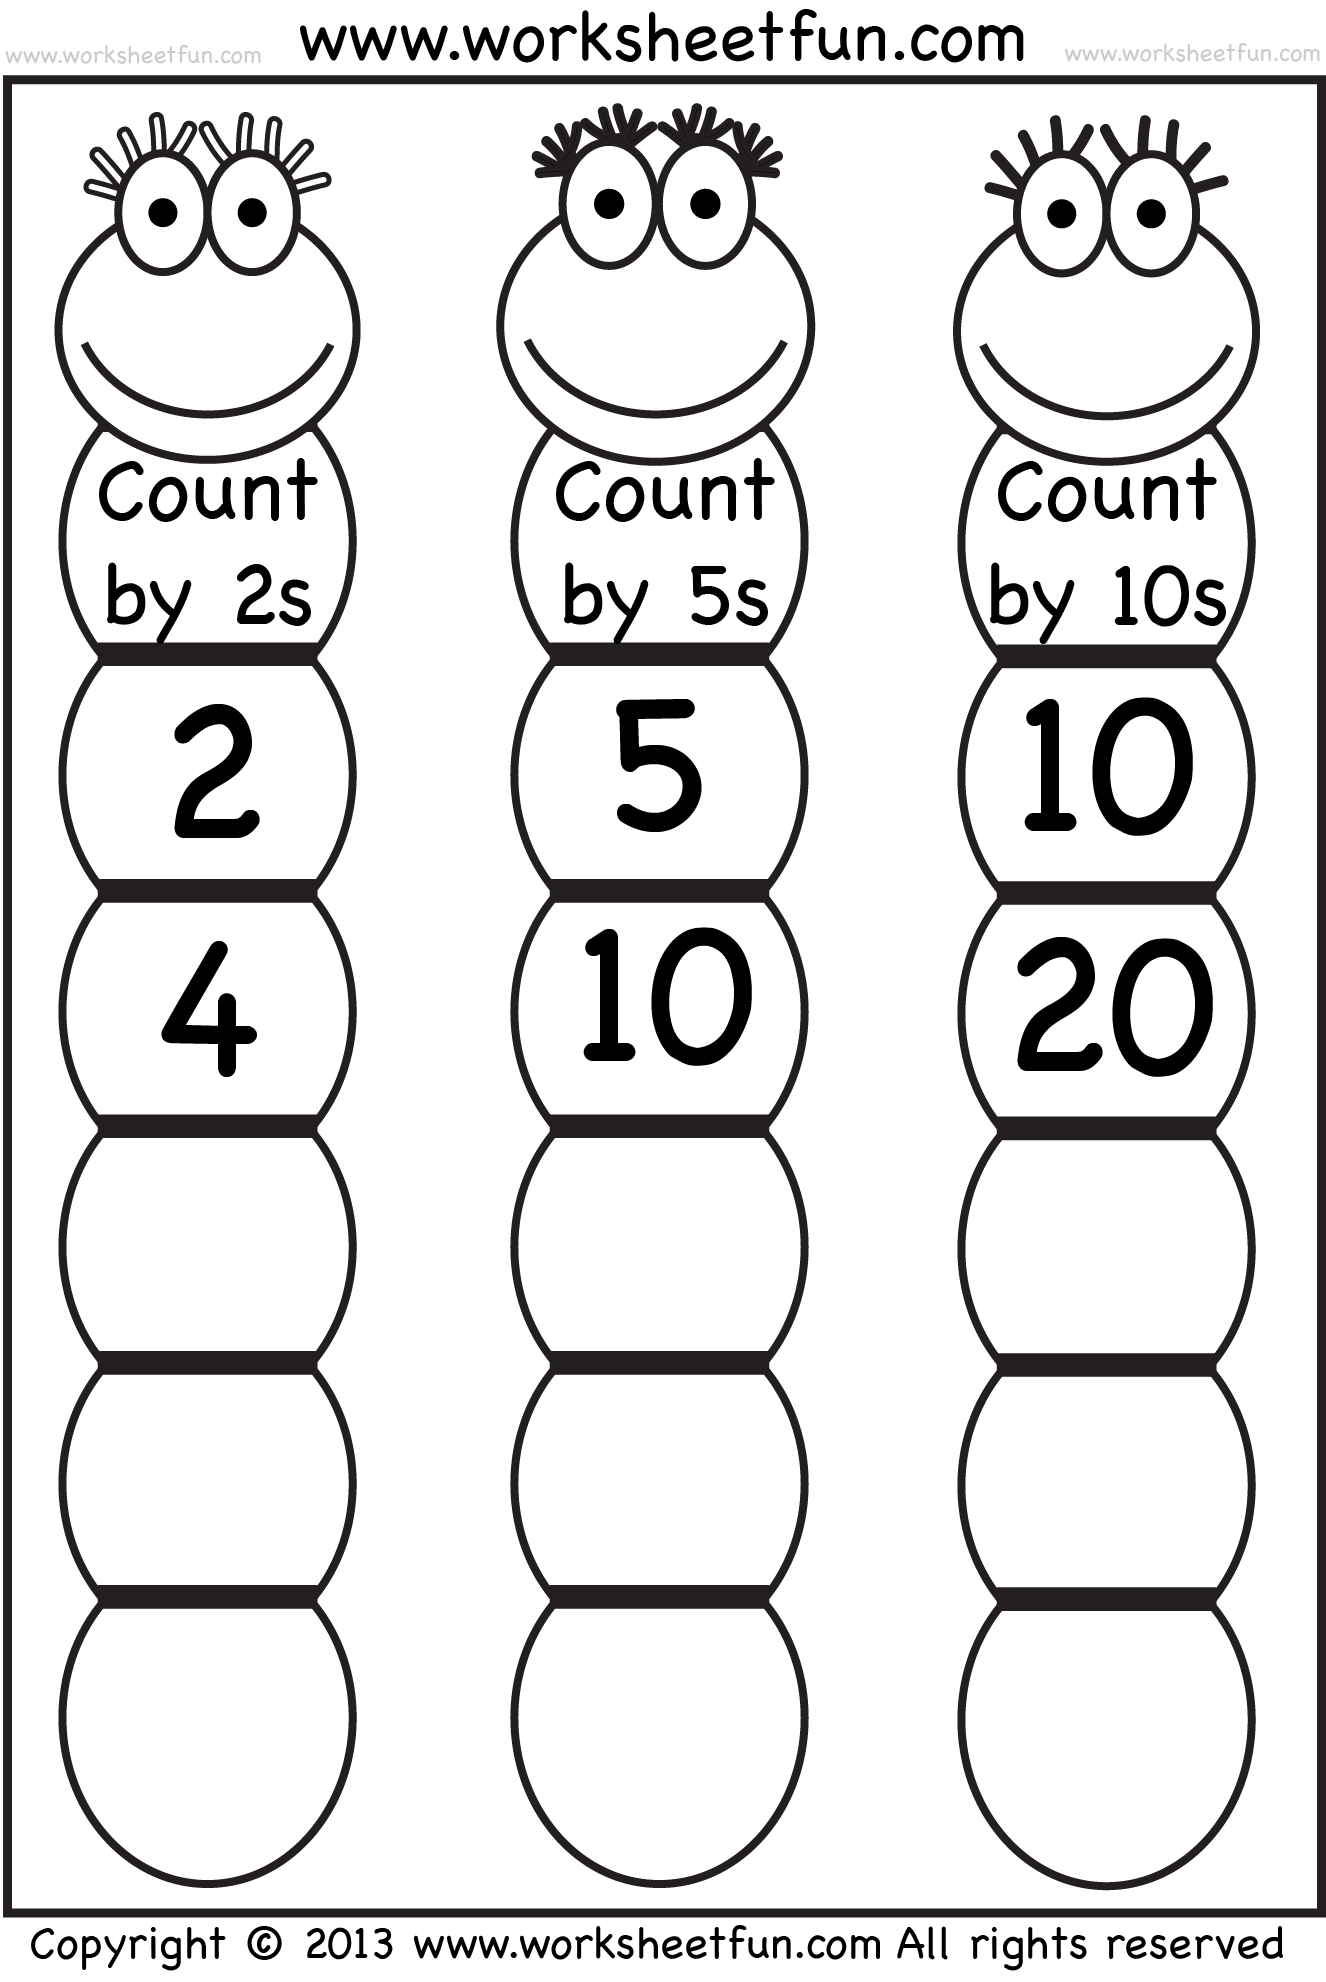 Skip Counting by 21, 21 and 21 – Worksheet / FREE Printable Pertaining To Count By 5s Worksheet